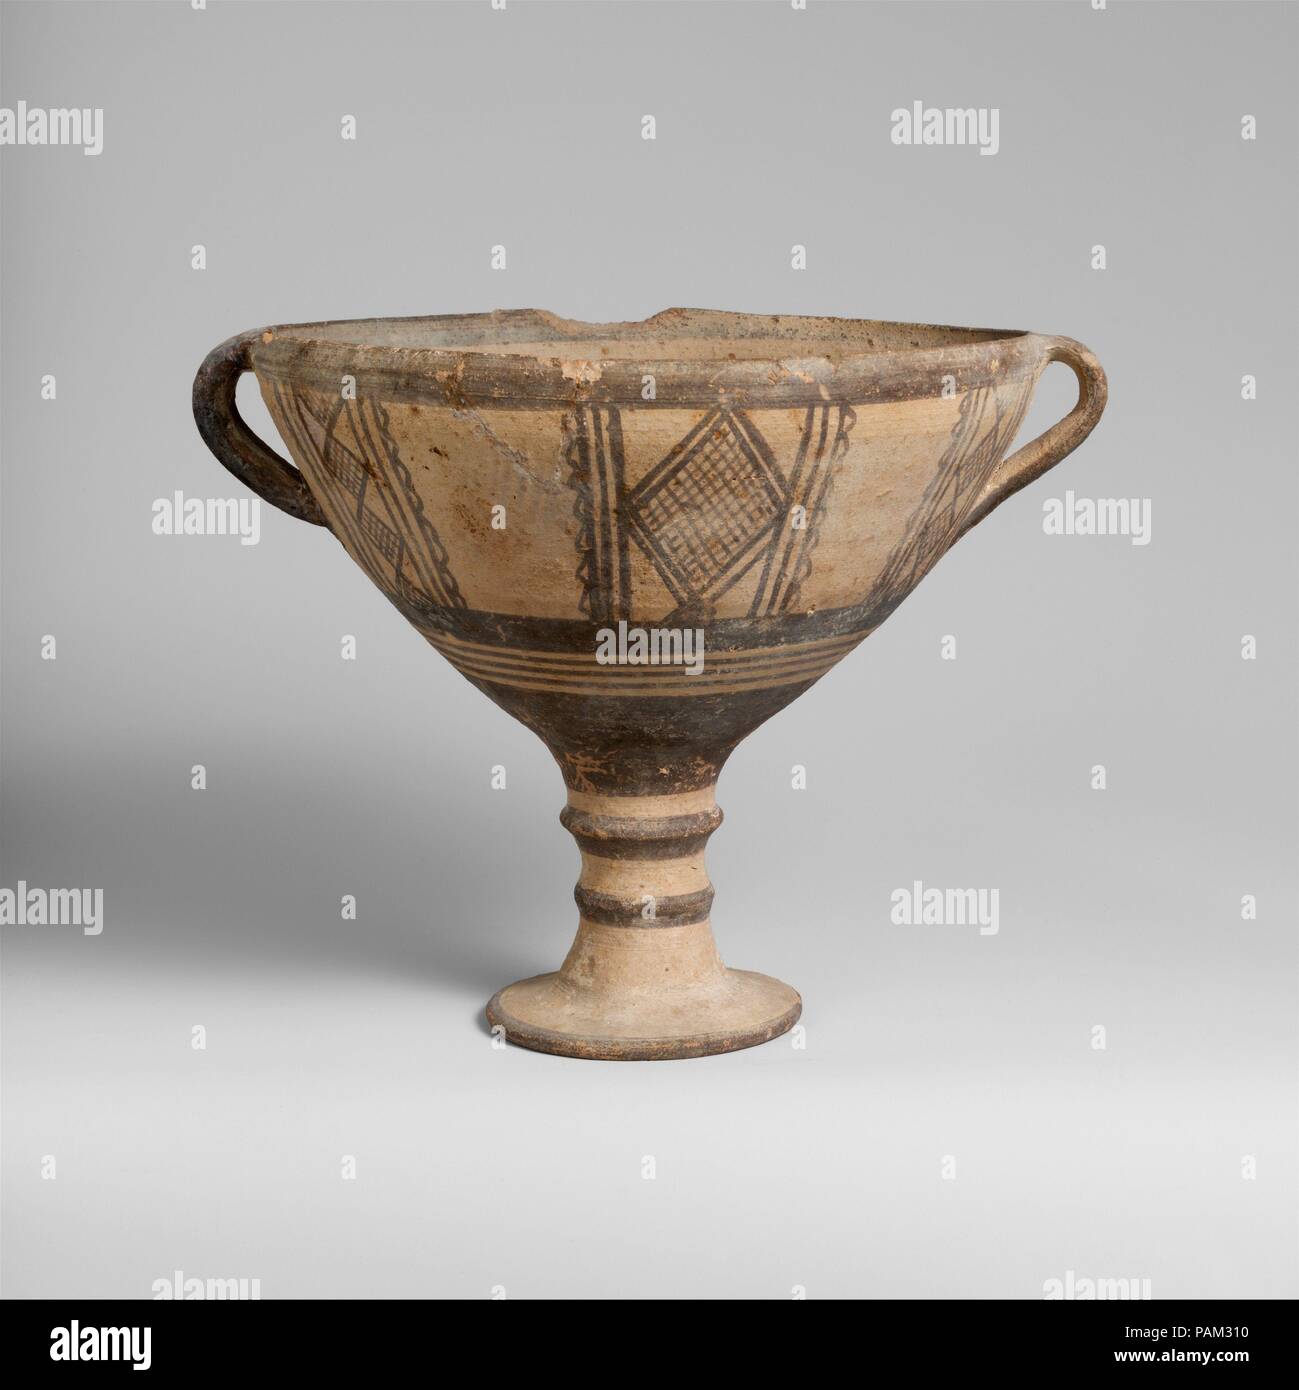 Terracotta stemmed cup. Culture: Cypriot. Dimensions: H. 6 3/4 in. (17.2 cm); diameter  7 5/16 in. (18.6 cm). Date: 1050-950 B.C..  High foot, with lattice designs in panels. Museum: Metropolitan Museum of Art, New York, USA. Stock Photo